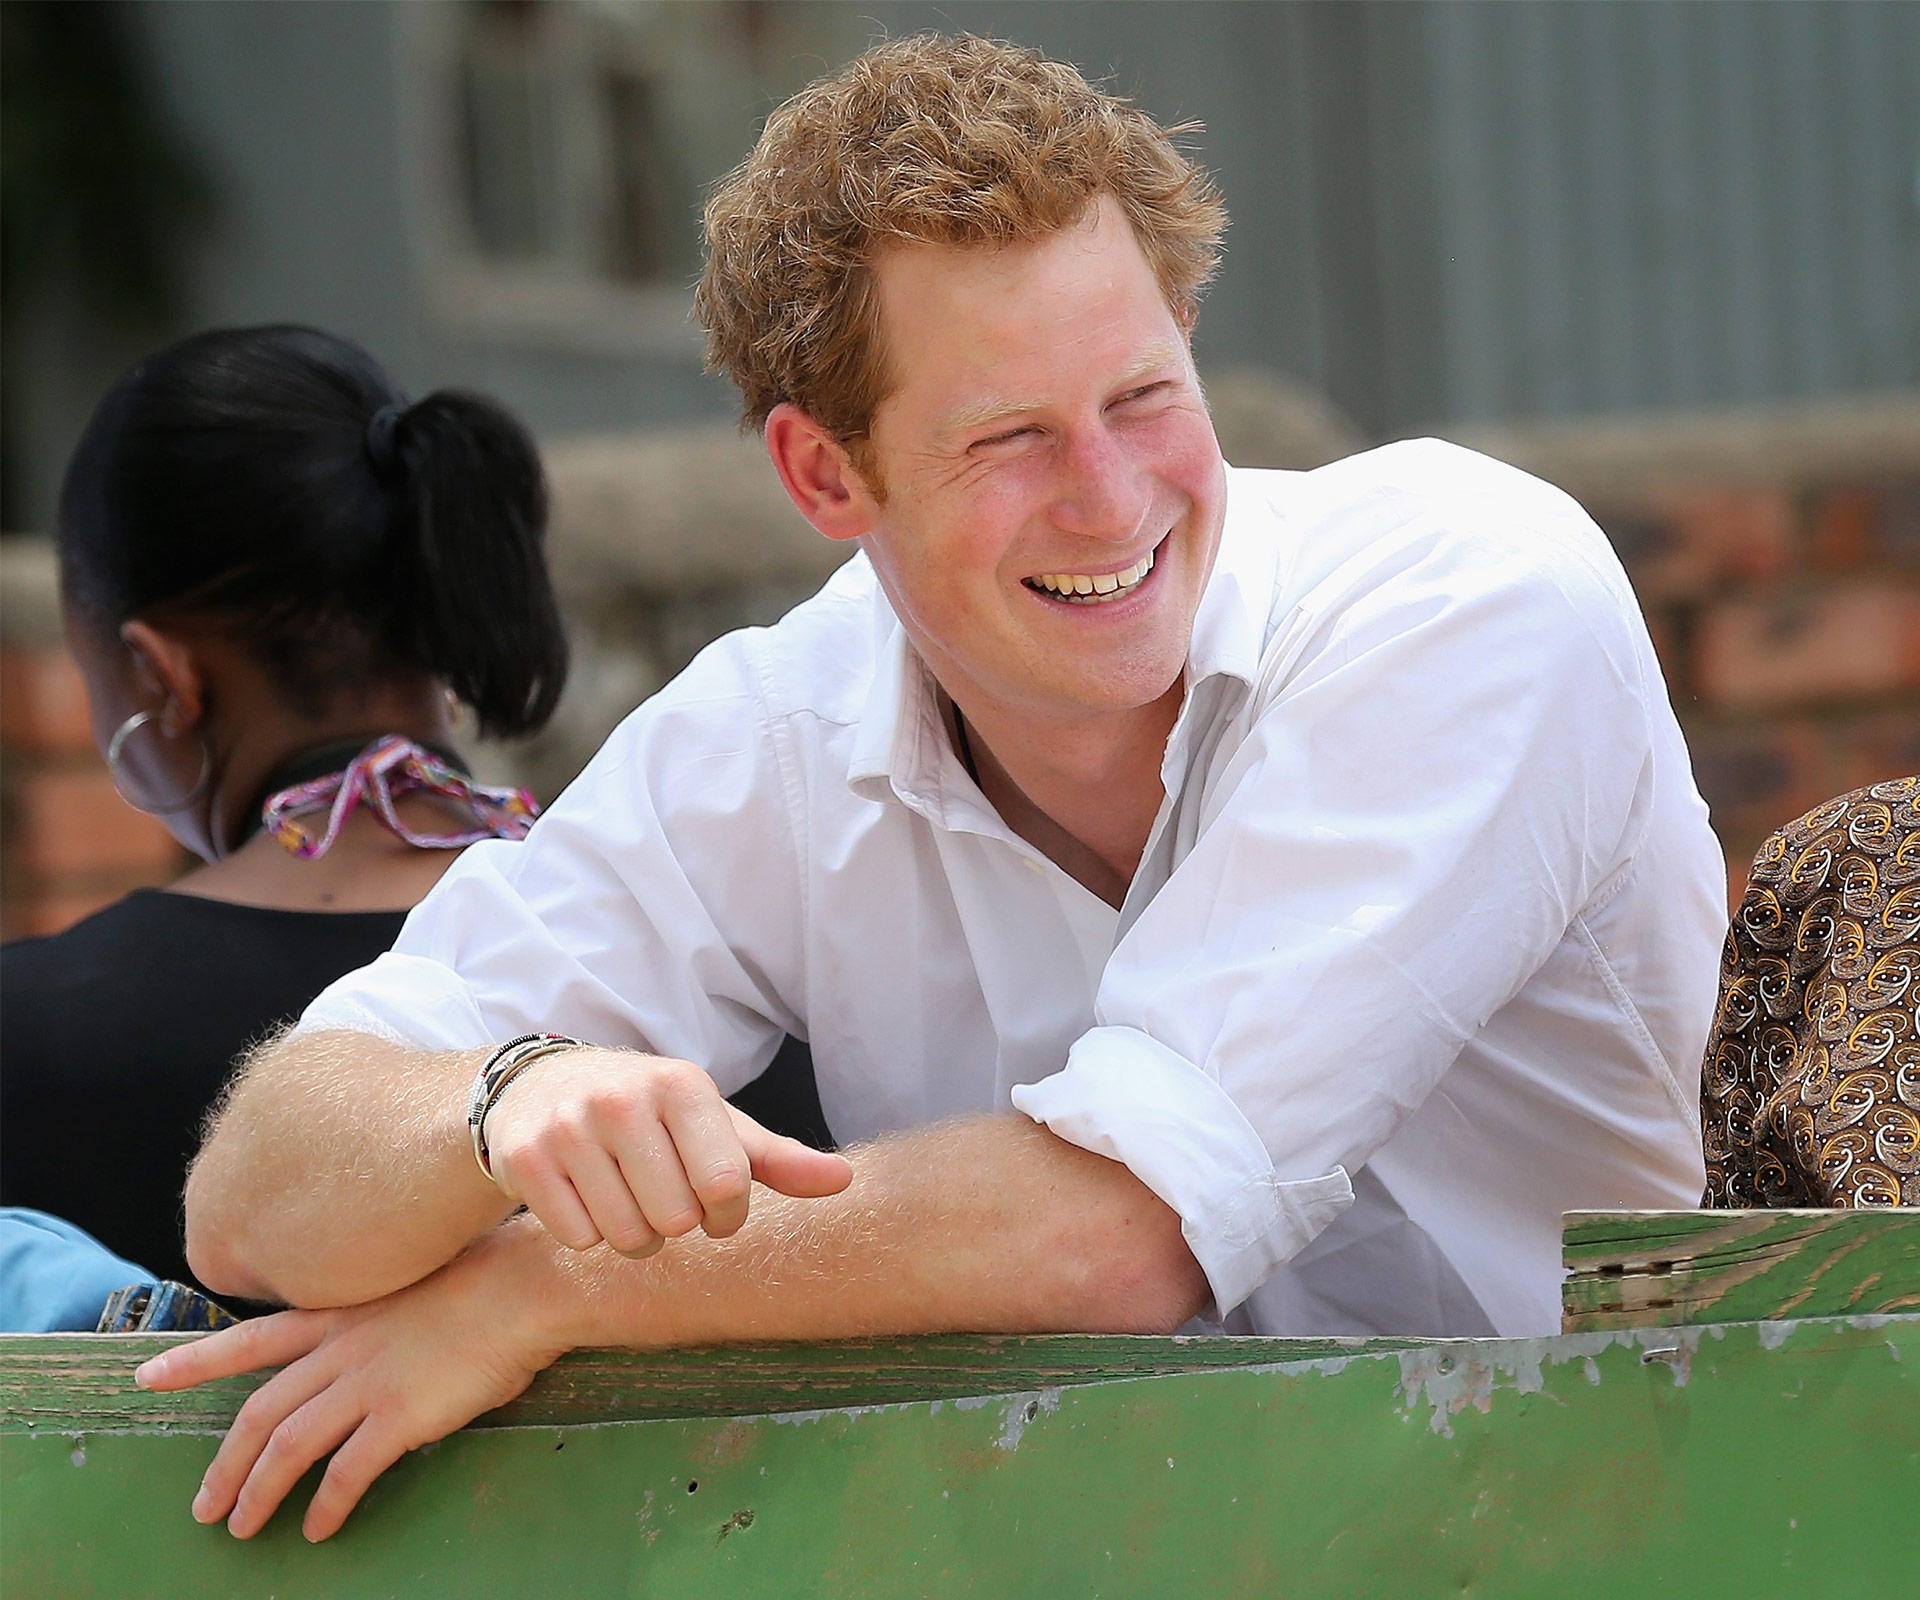 Wildlife crusader Prince Harry jokes he’s a “bad uncle” to Princess Charlotte